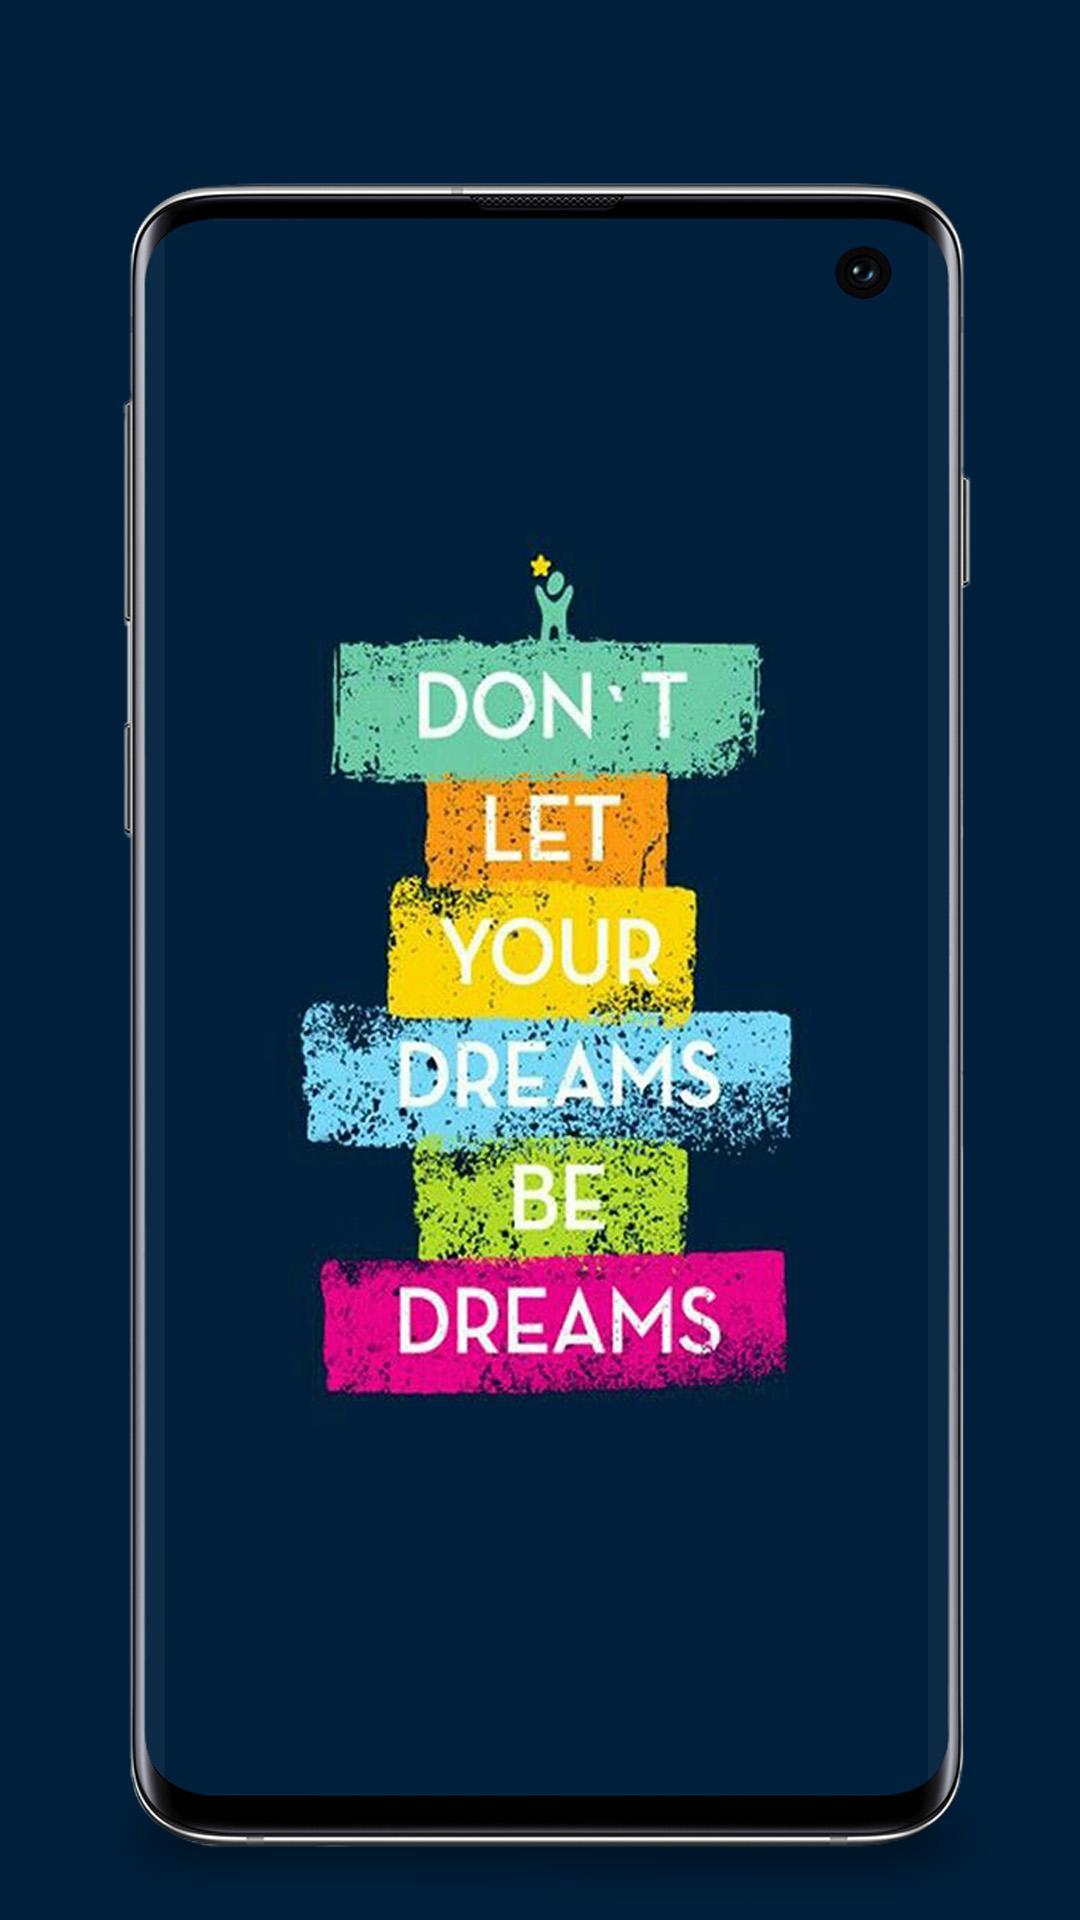 Motivational Quotes Wallpaper 4k for Android